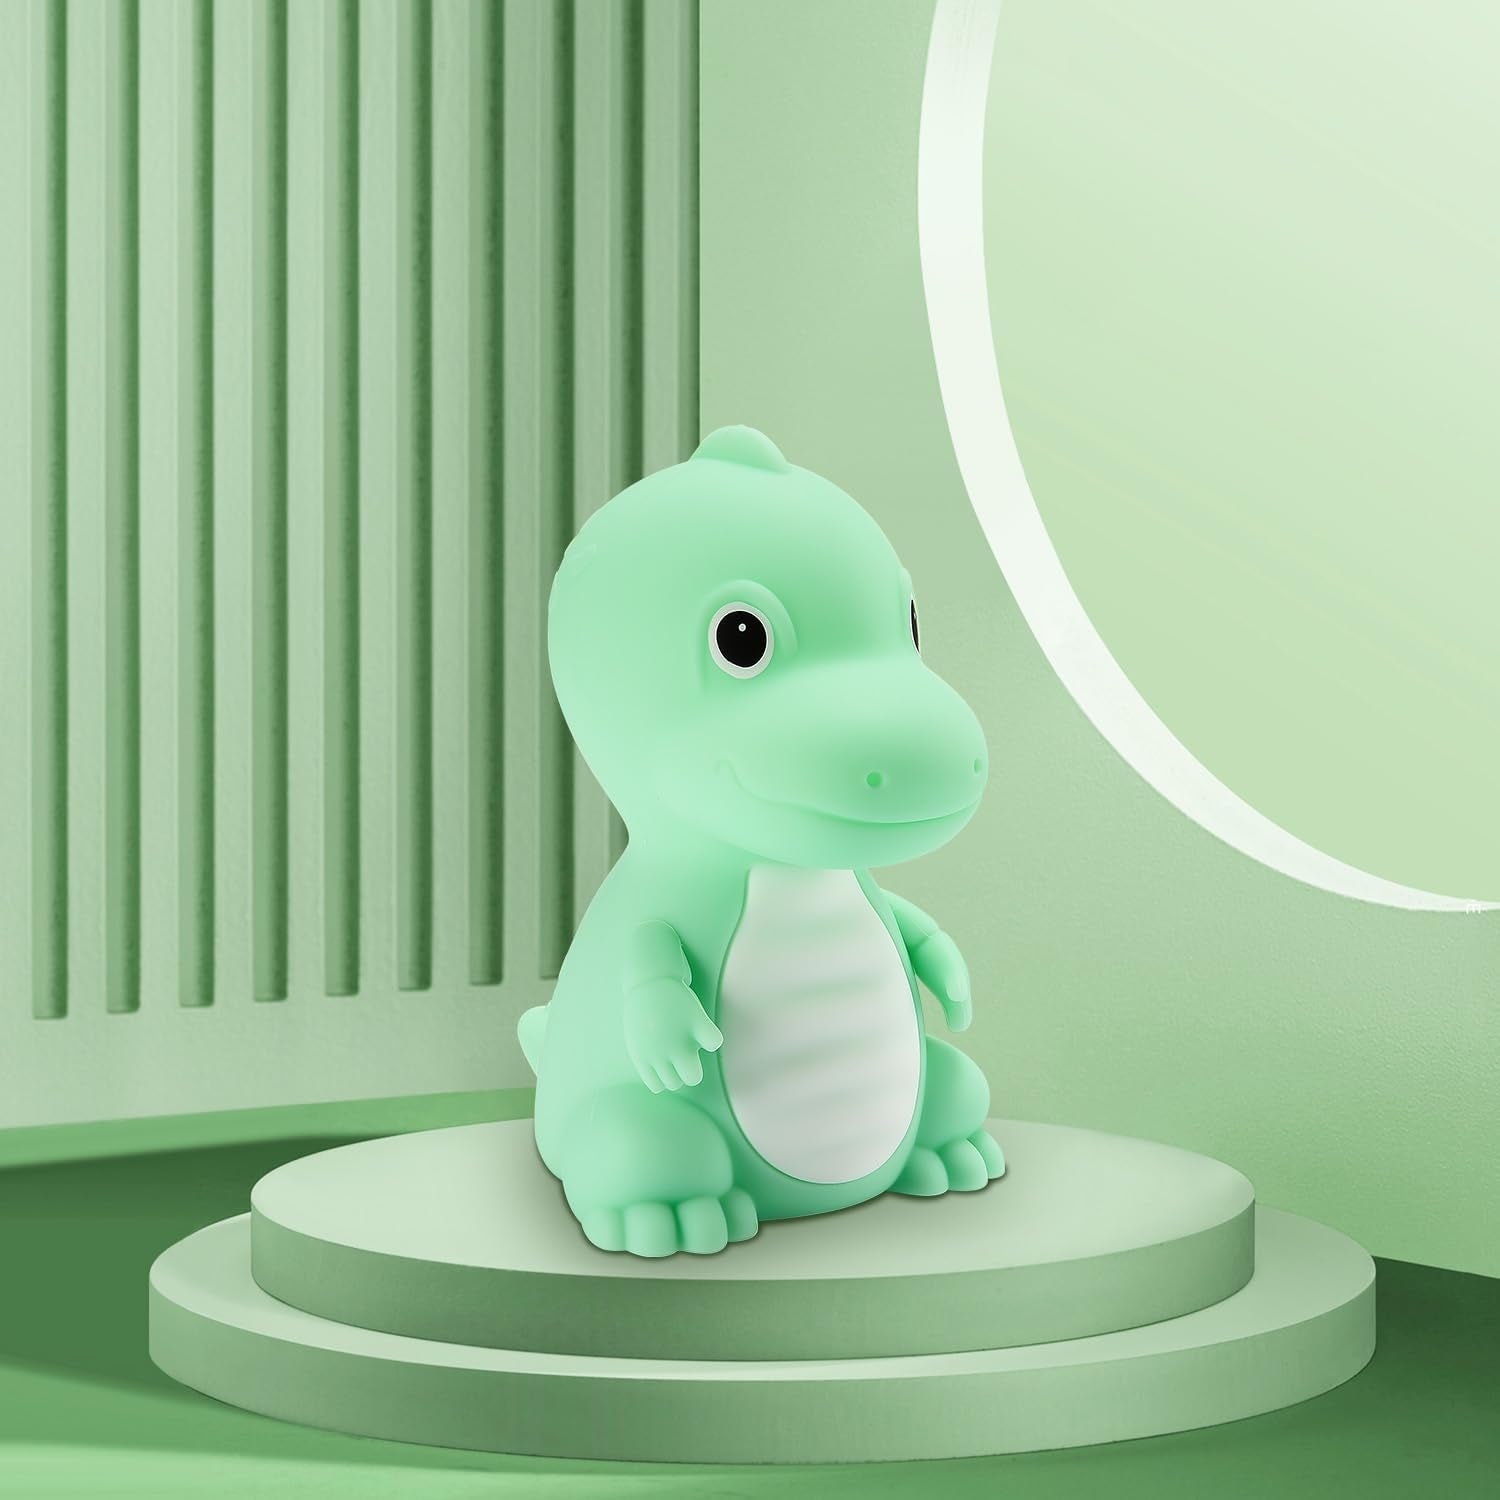 Dinosaurs Night Light for Kids 30Min Timer Control, Silicone Touch Bedroom Baby Night Lamp, Rechargeable Battery LED Nursery Nightlight, Cute Room Decor Gift for Women Baby (Green)